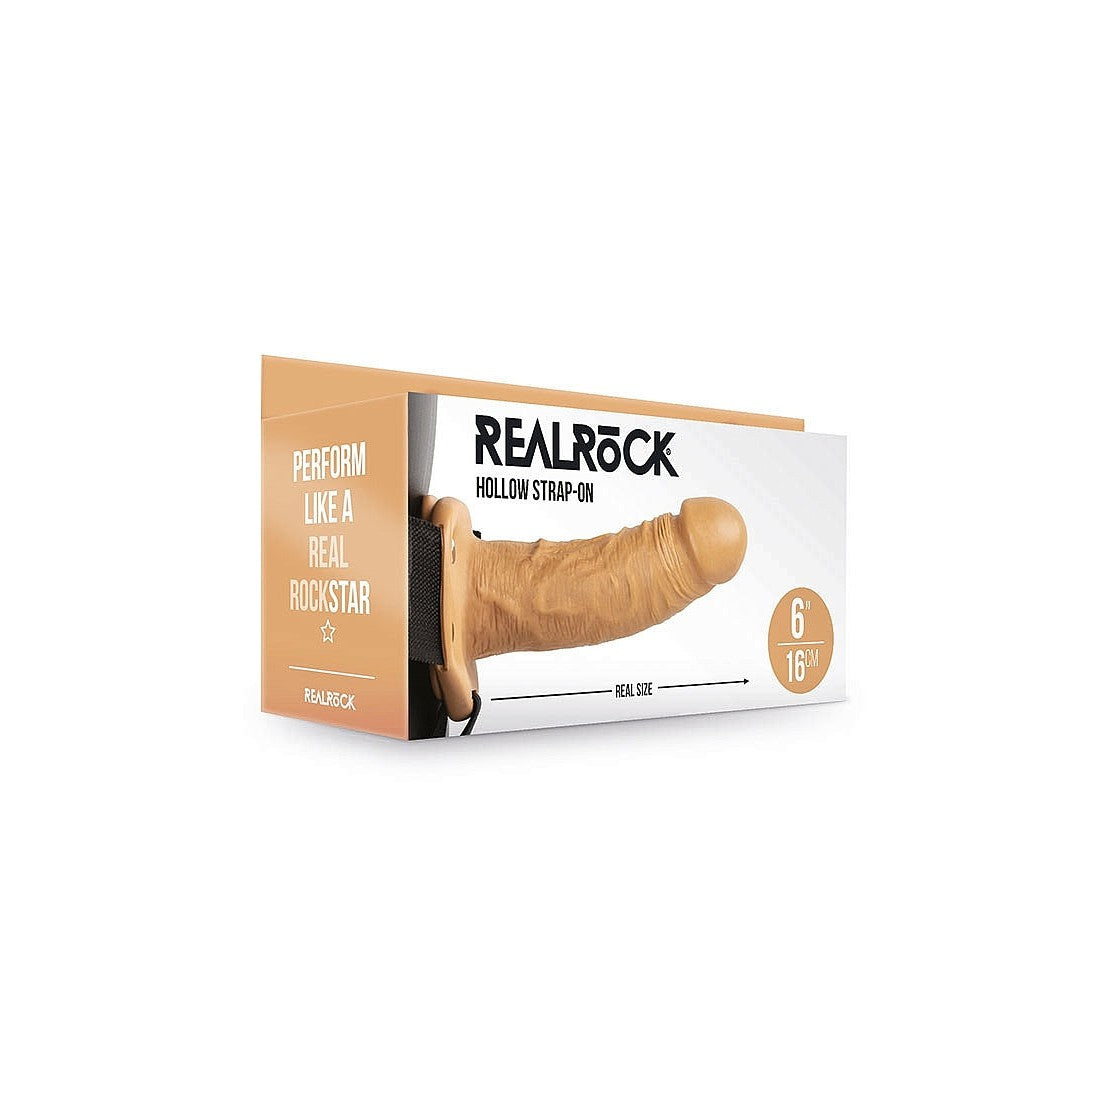 RealRock 6 Inch Hollow Strap-On - Tan